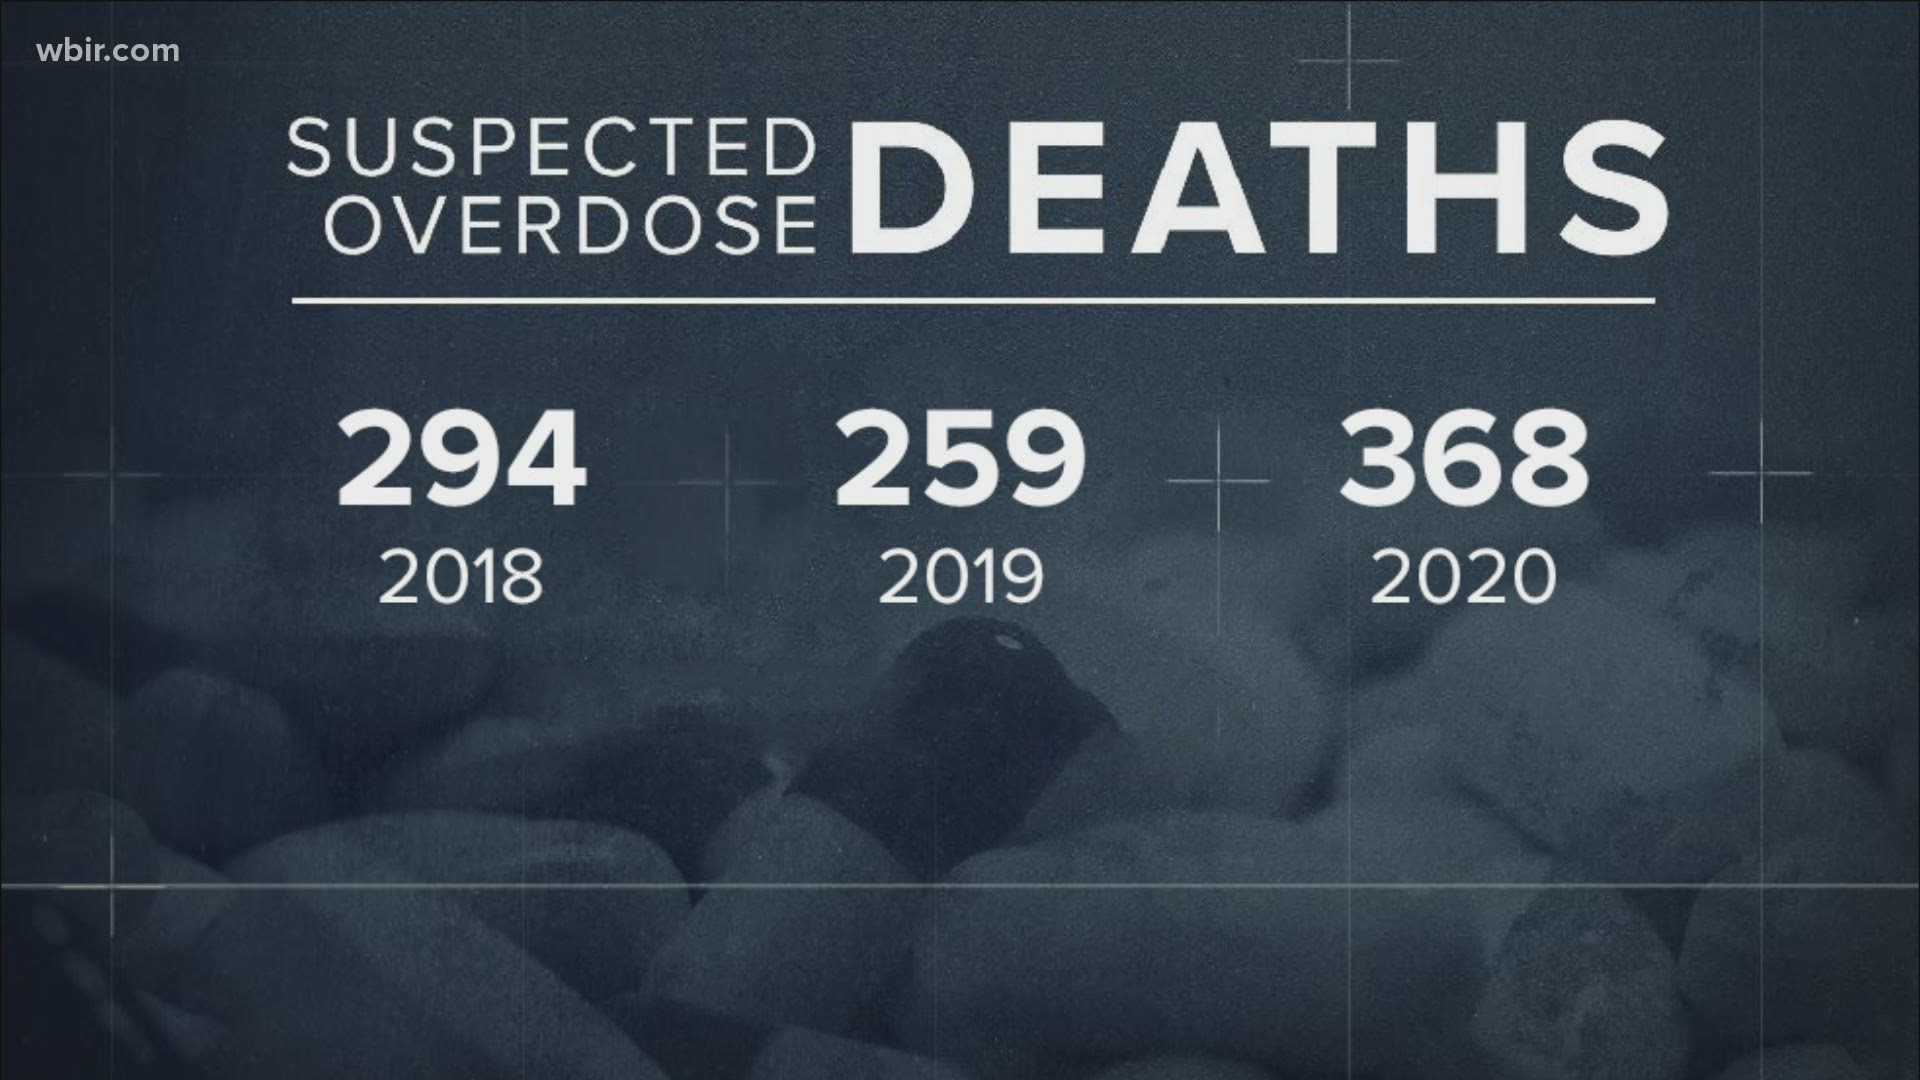 In 2020, the district attorney's office says suspected overdose deaths were at an all-time high with 368.